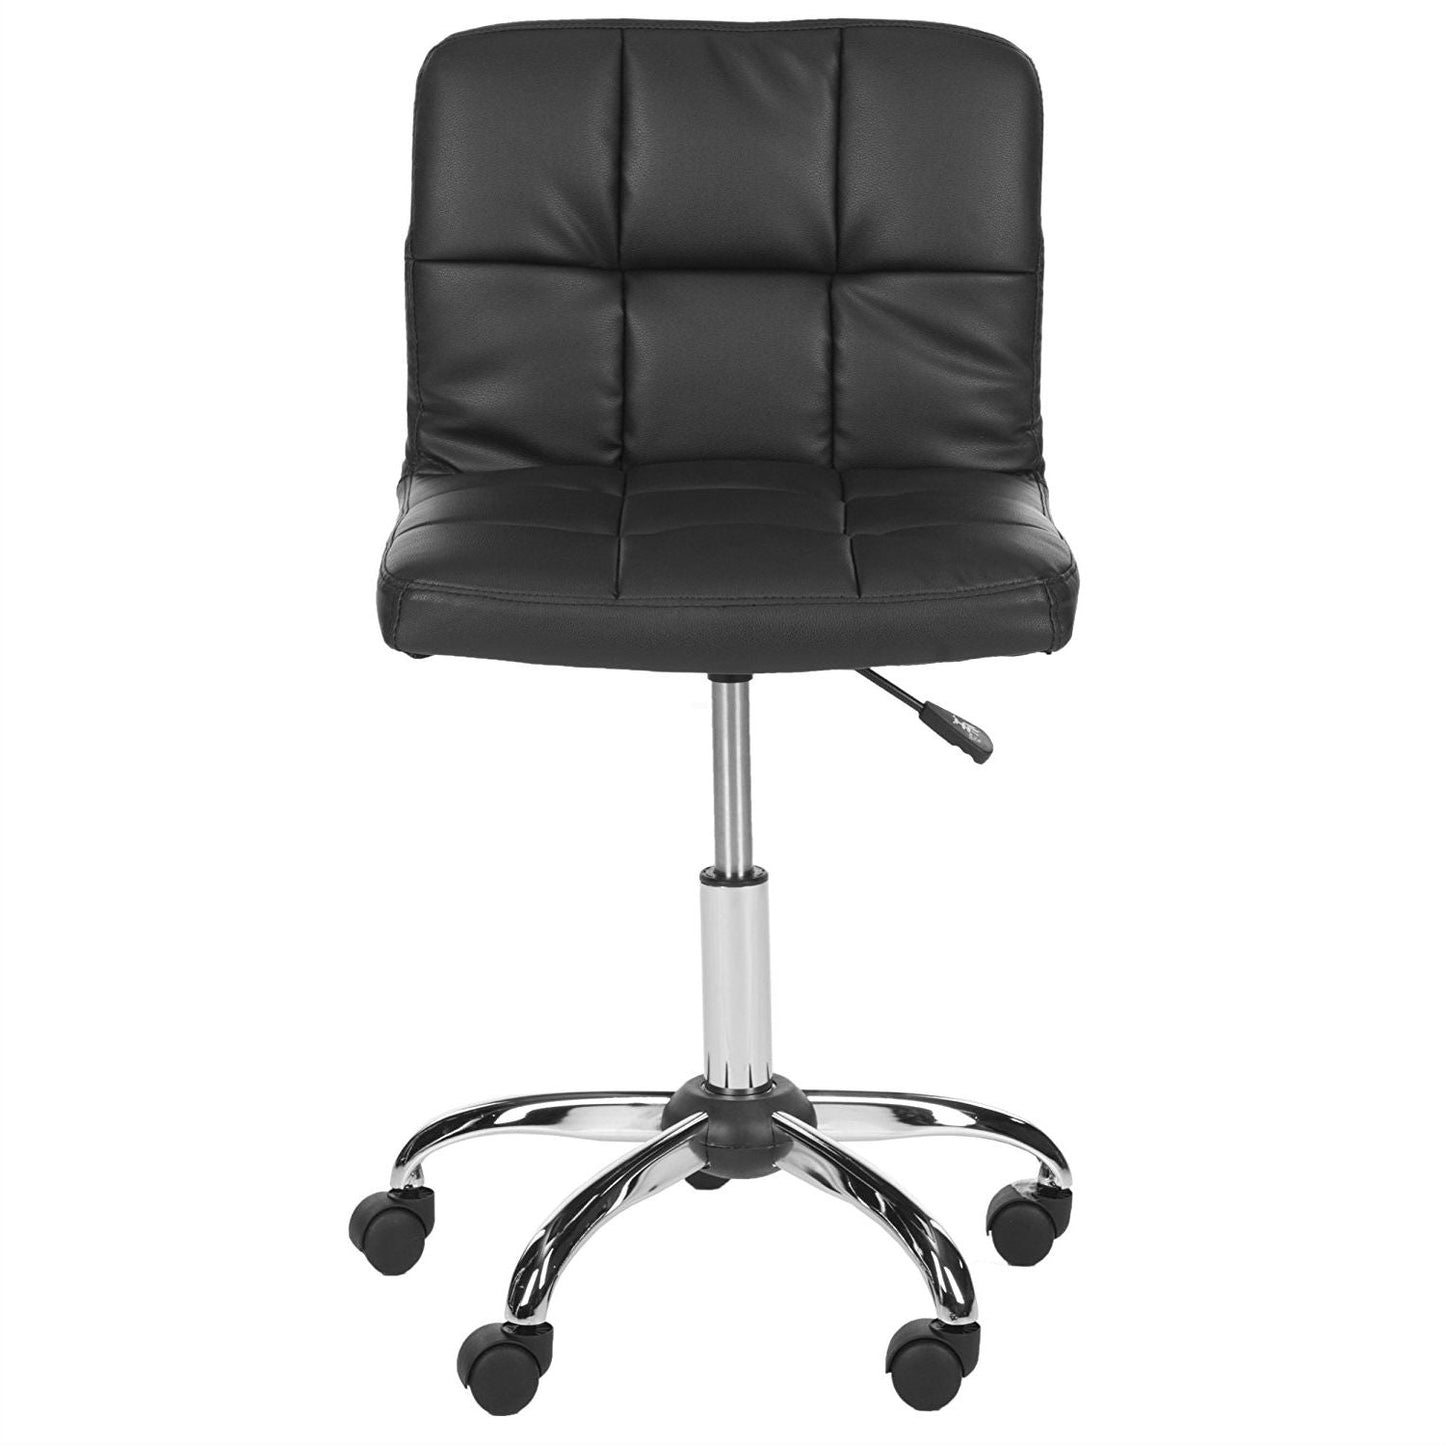 Office > Office Chairs - Modern Black Faux Leather Cushion Home Office Desk Chair